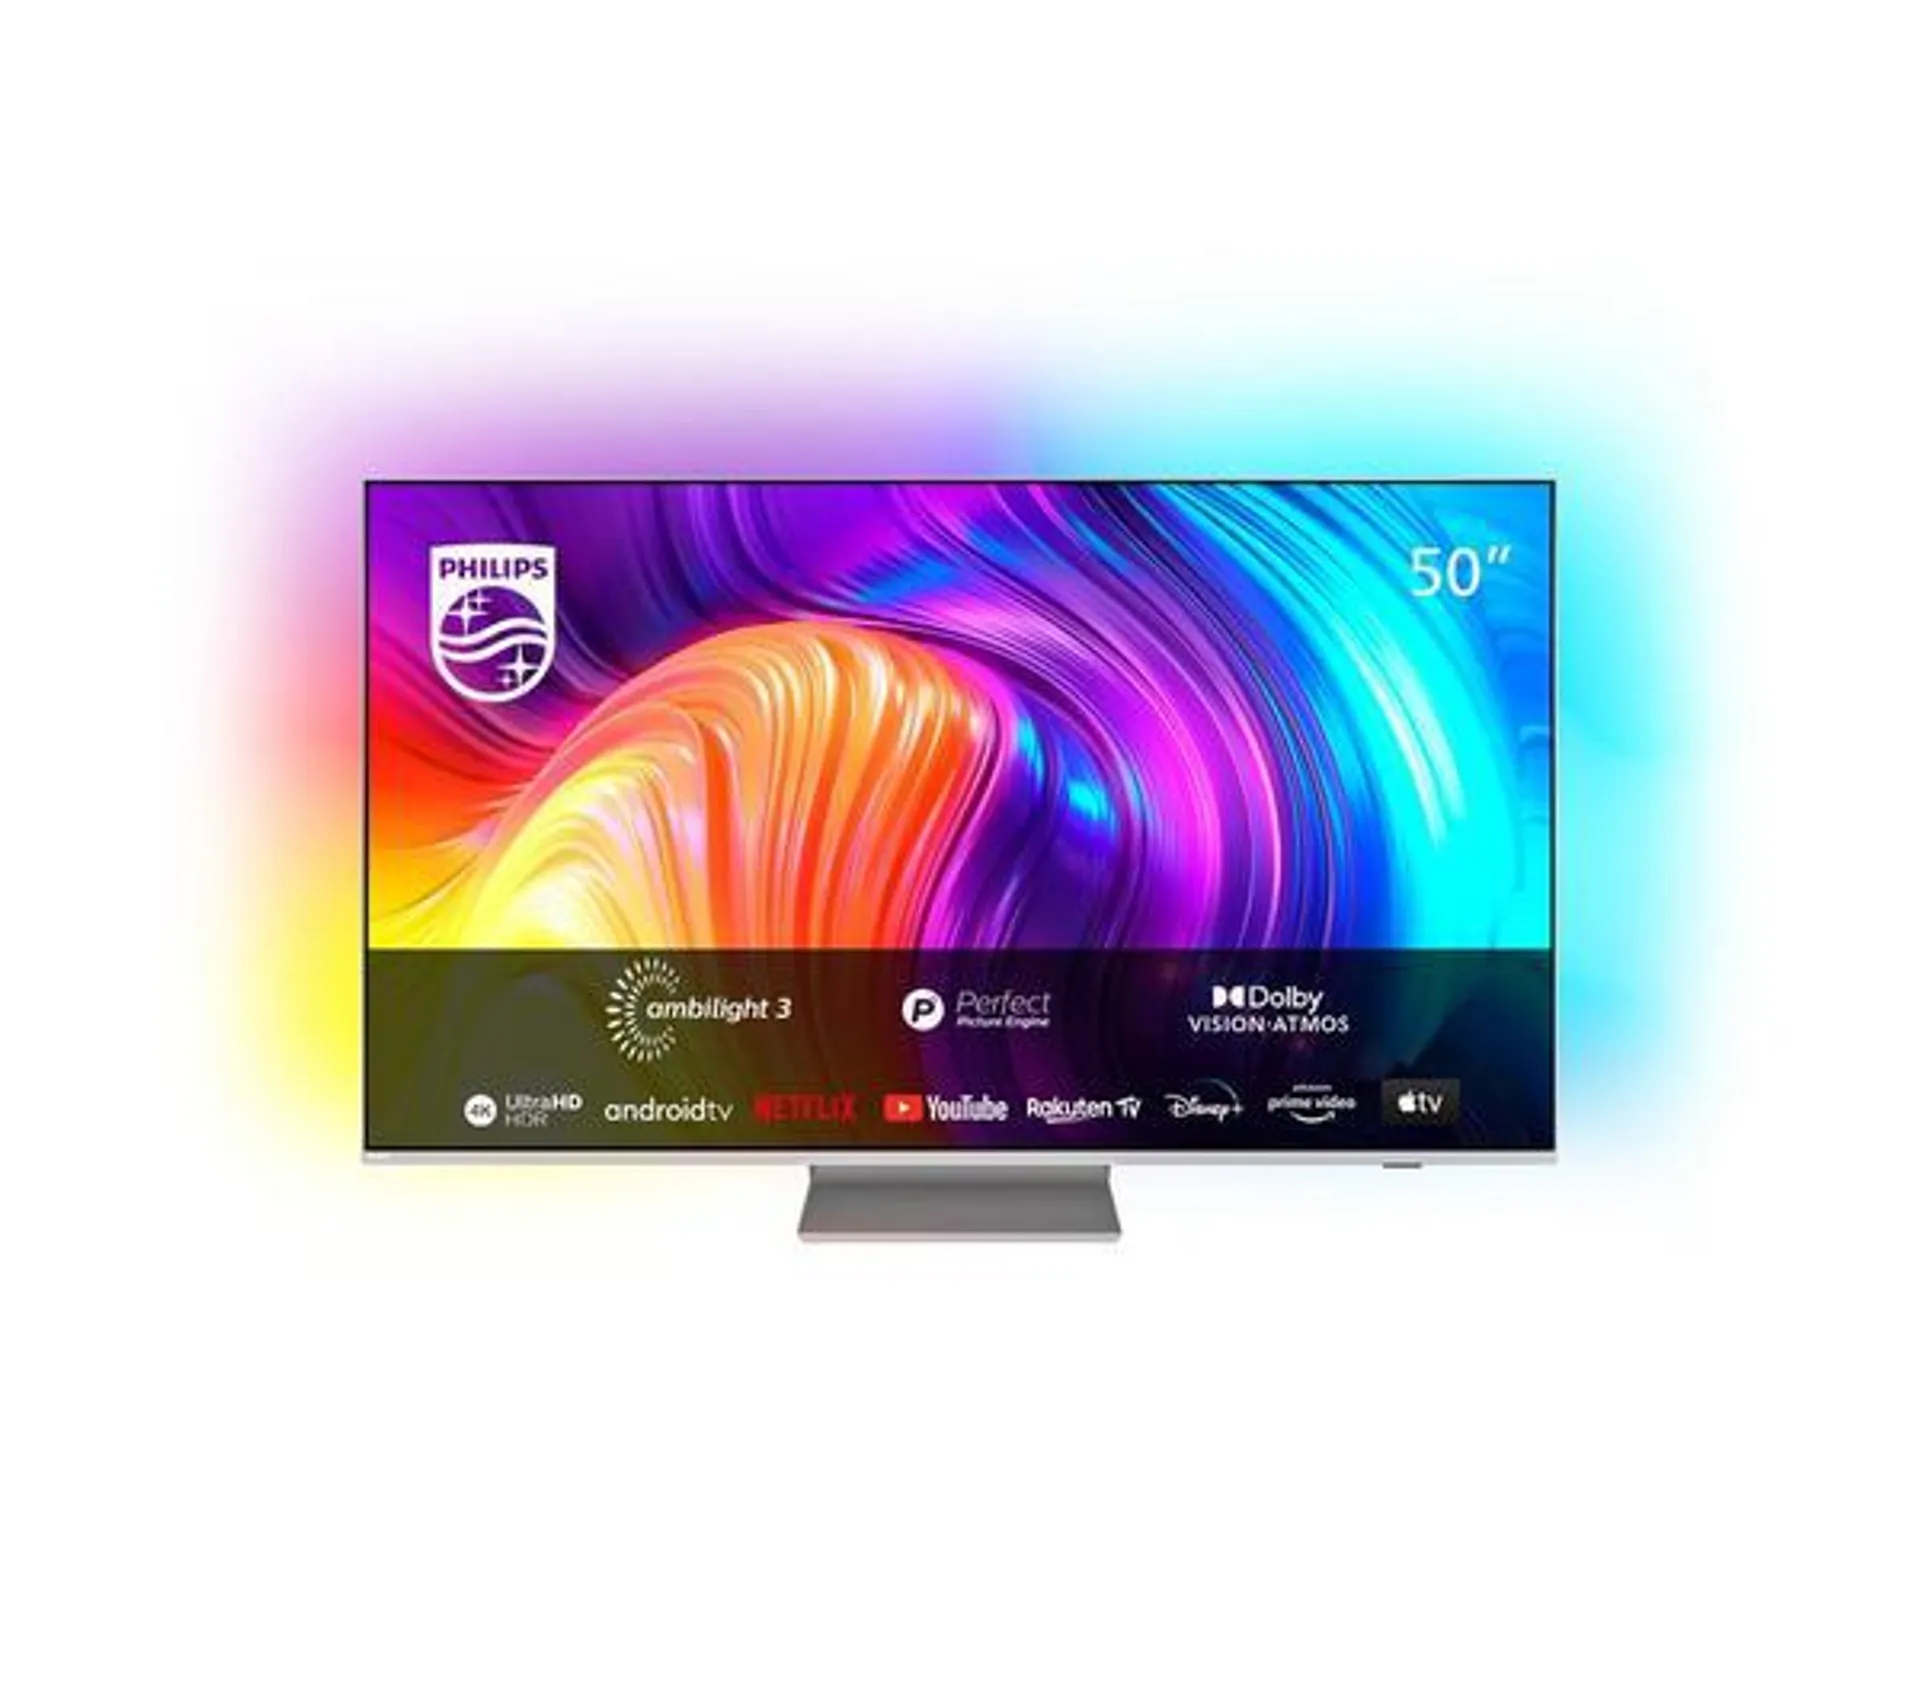 PHILIPS 50PUS8807/12 50" Smart 4K Ultra HD HDR LED TV with Google Assistant